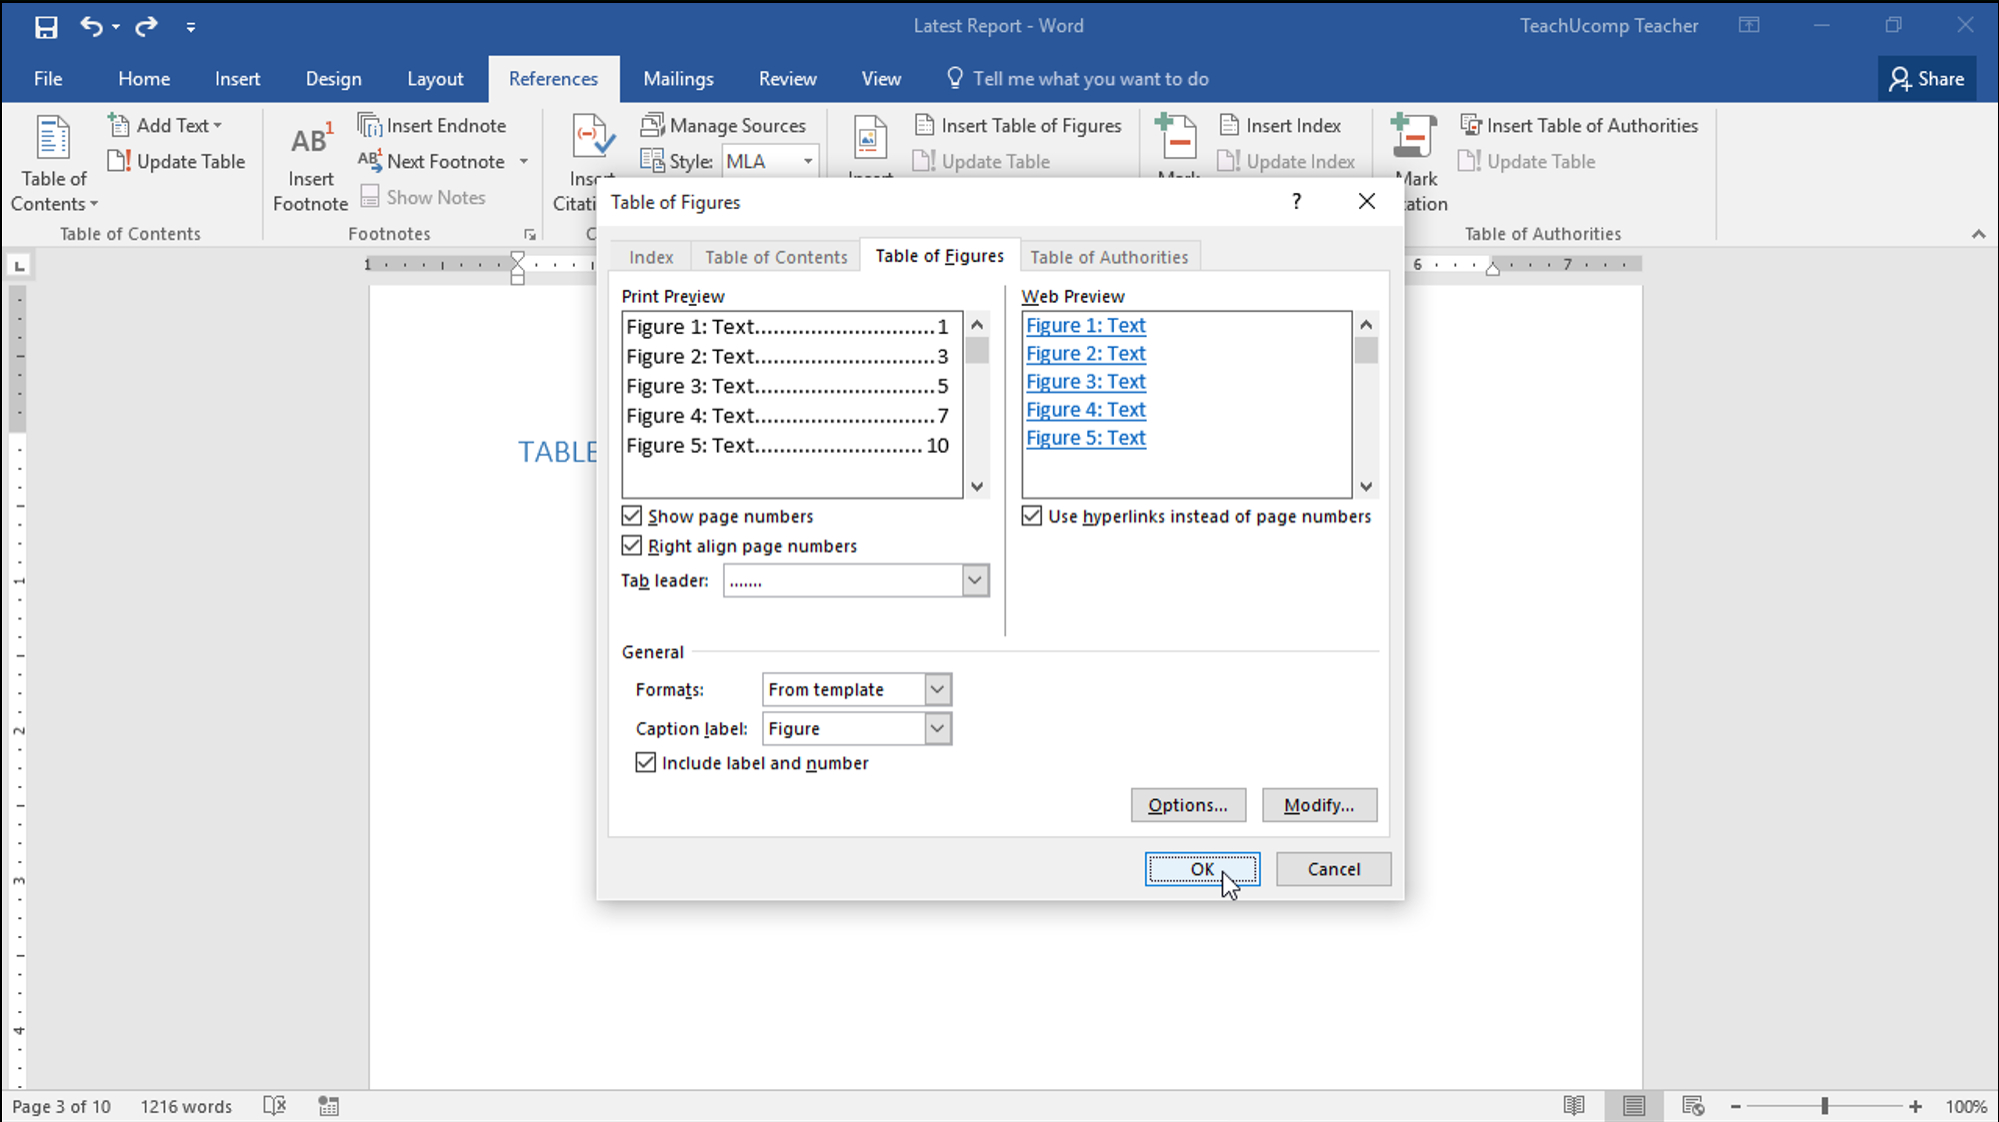 Insert A Table Of Figures In Word - Teachucomp, Inc. Inside Microsoft Word Table Of Contents Template